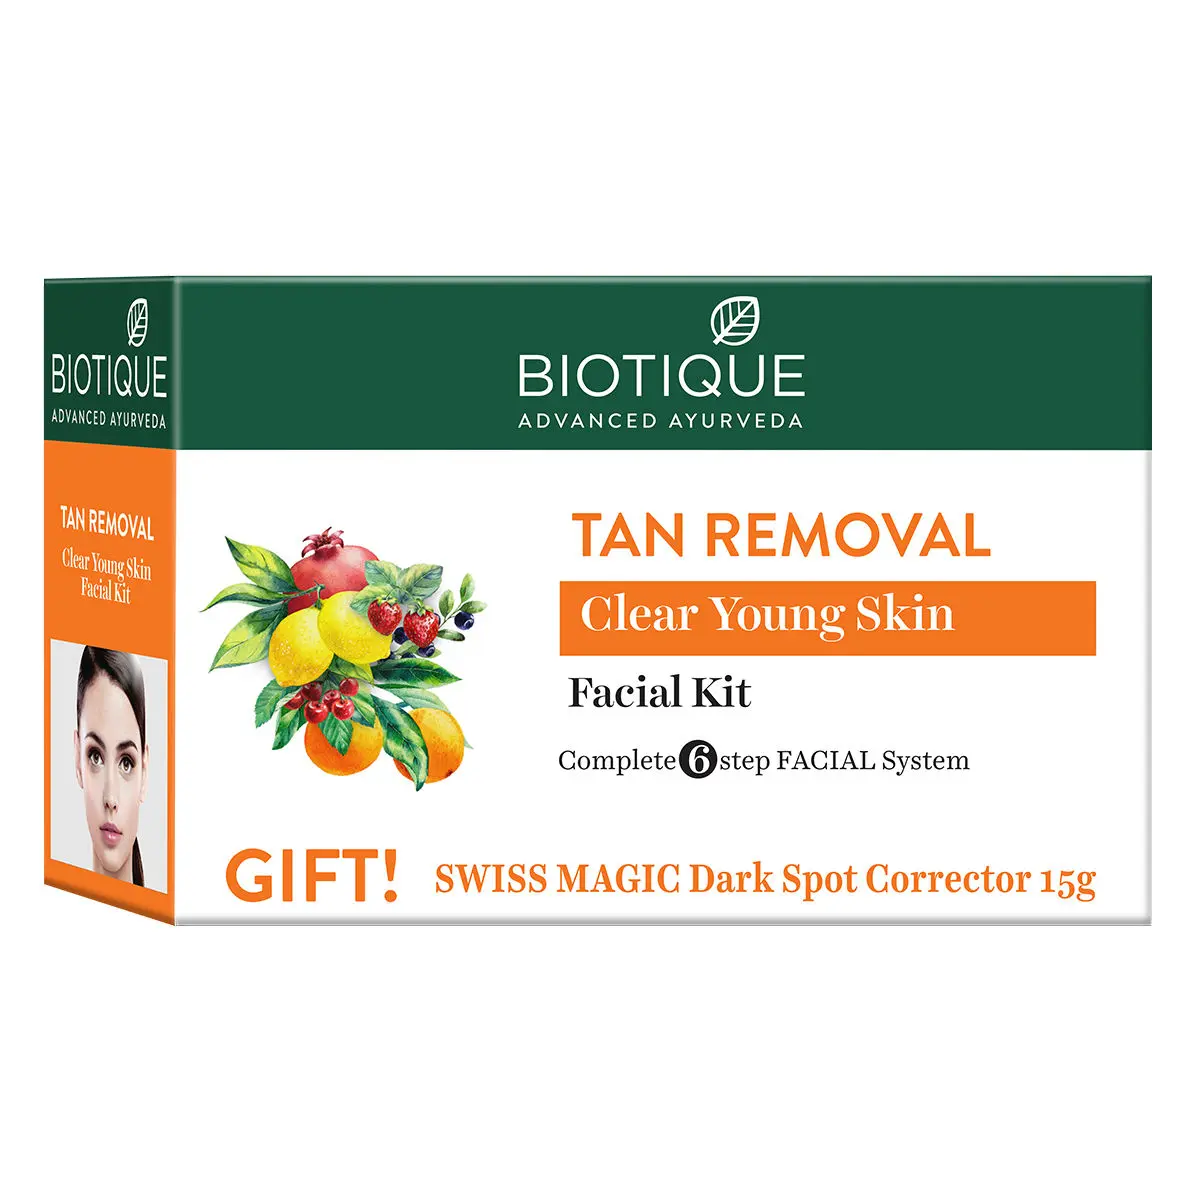 Biotique Tan Removal Clear Young Skin Facial Kit (65 g)